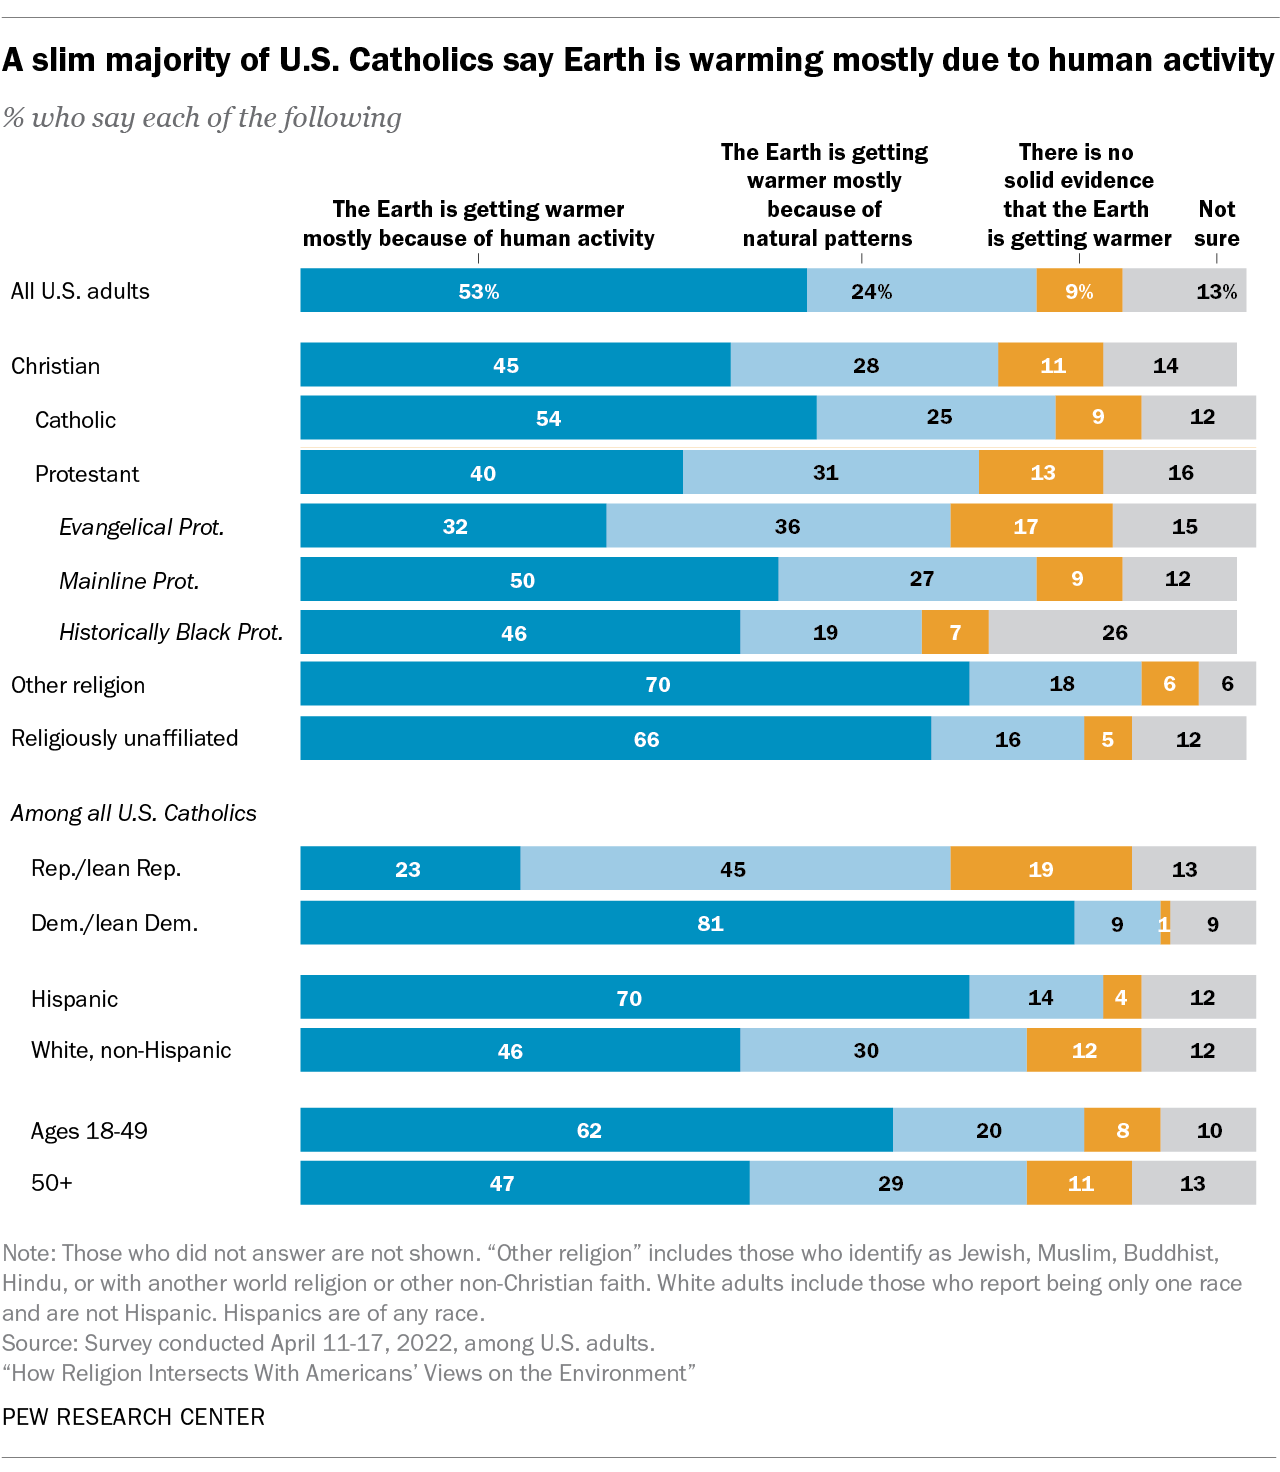 A bar chart showing a slim majority of U.S. Catholics say Earth is warming mostly due to human activity